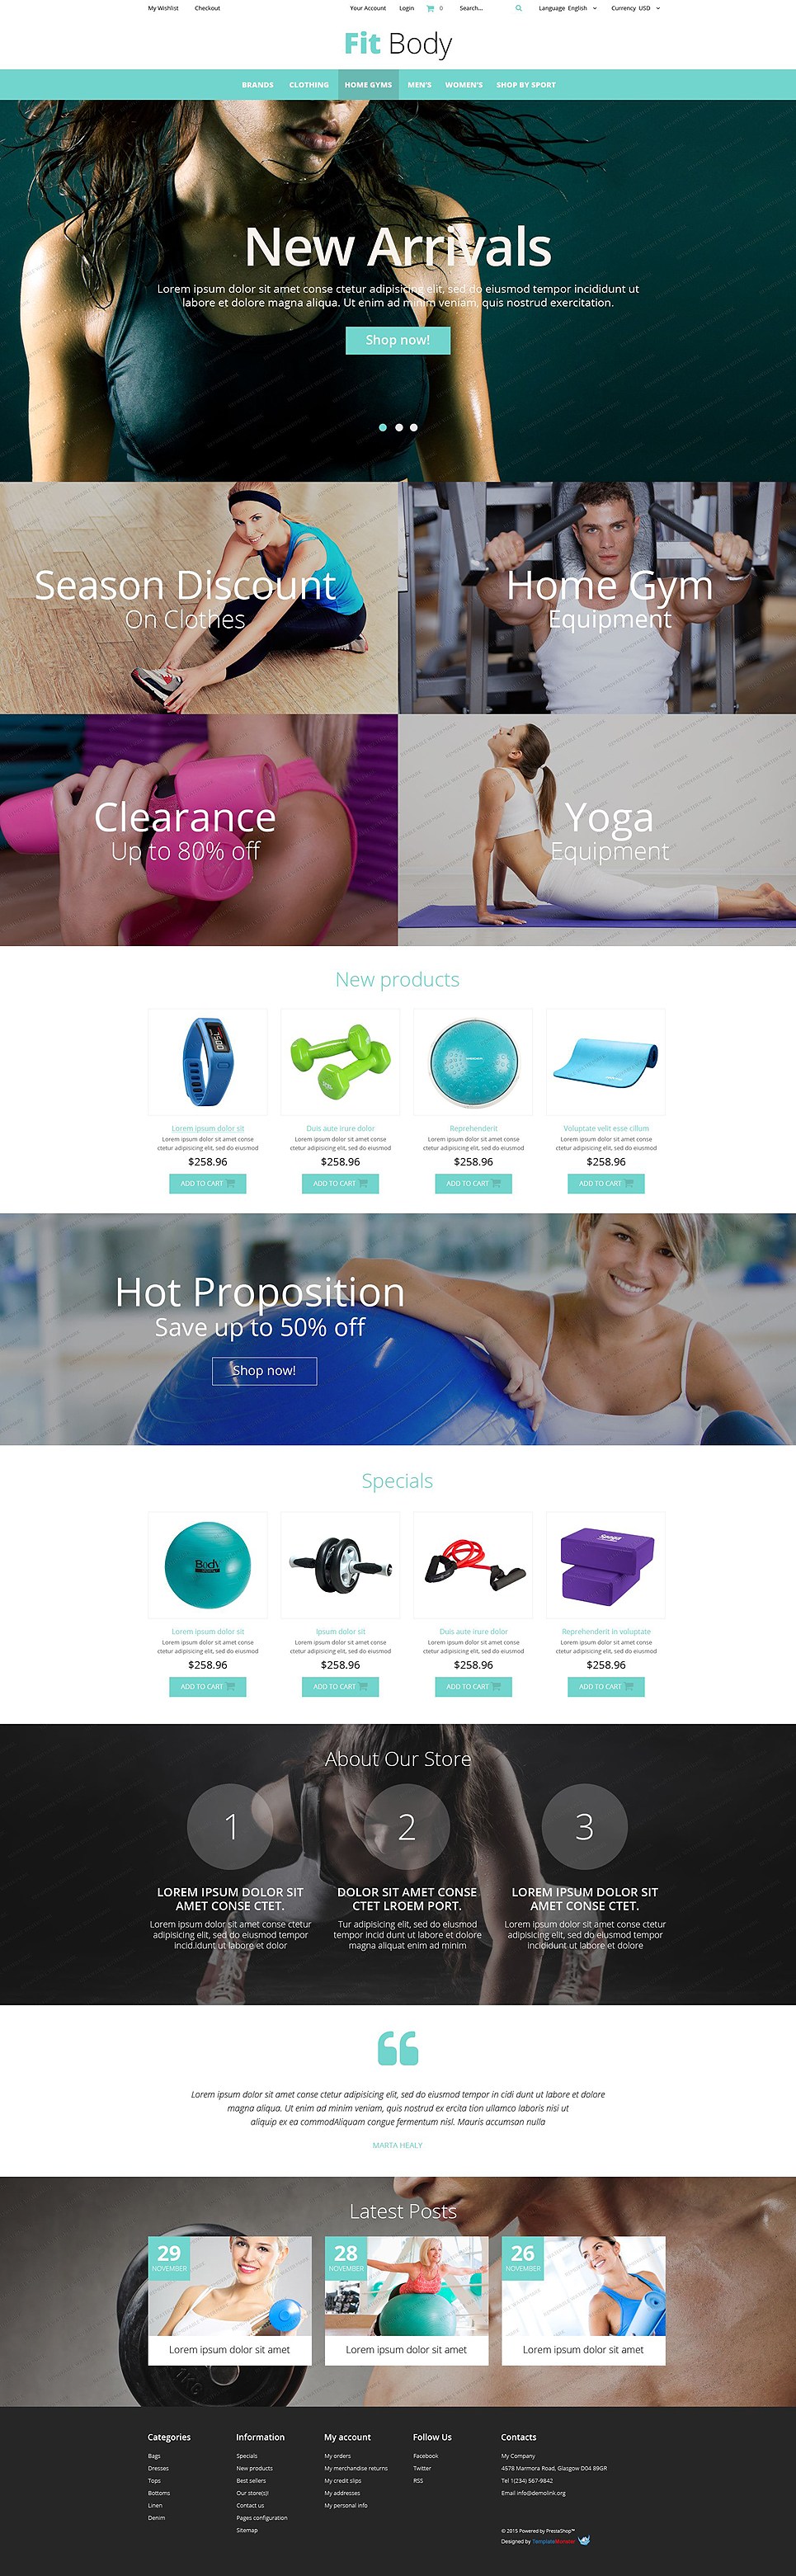 Free Magento Theme For Sports Store Http Www Freetemplatesonline Com Templates Free Magento Theme For Sport Magento Themes Free Web Template Free Web Design